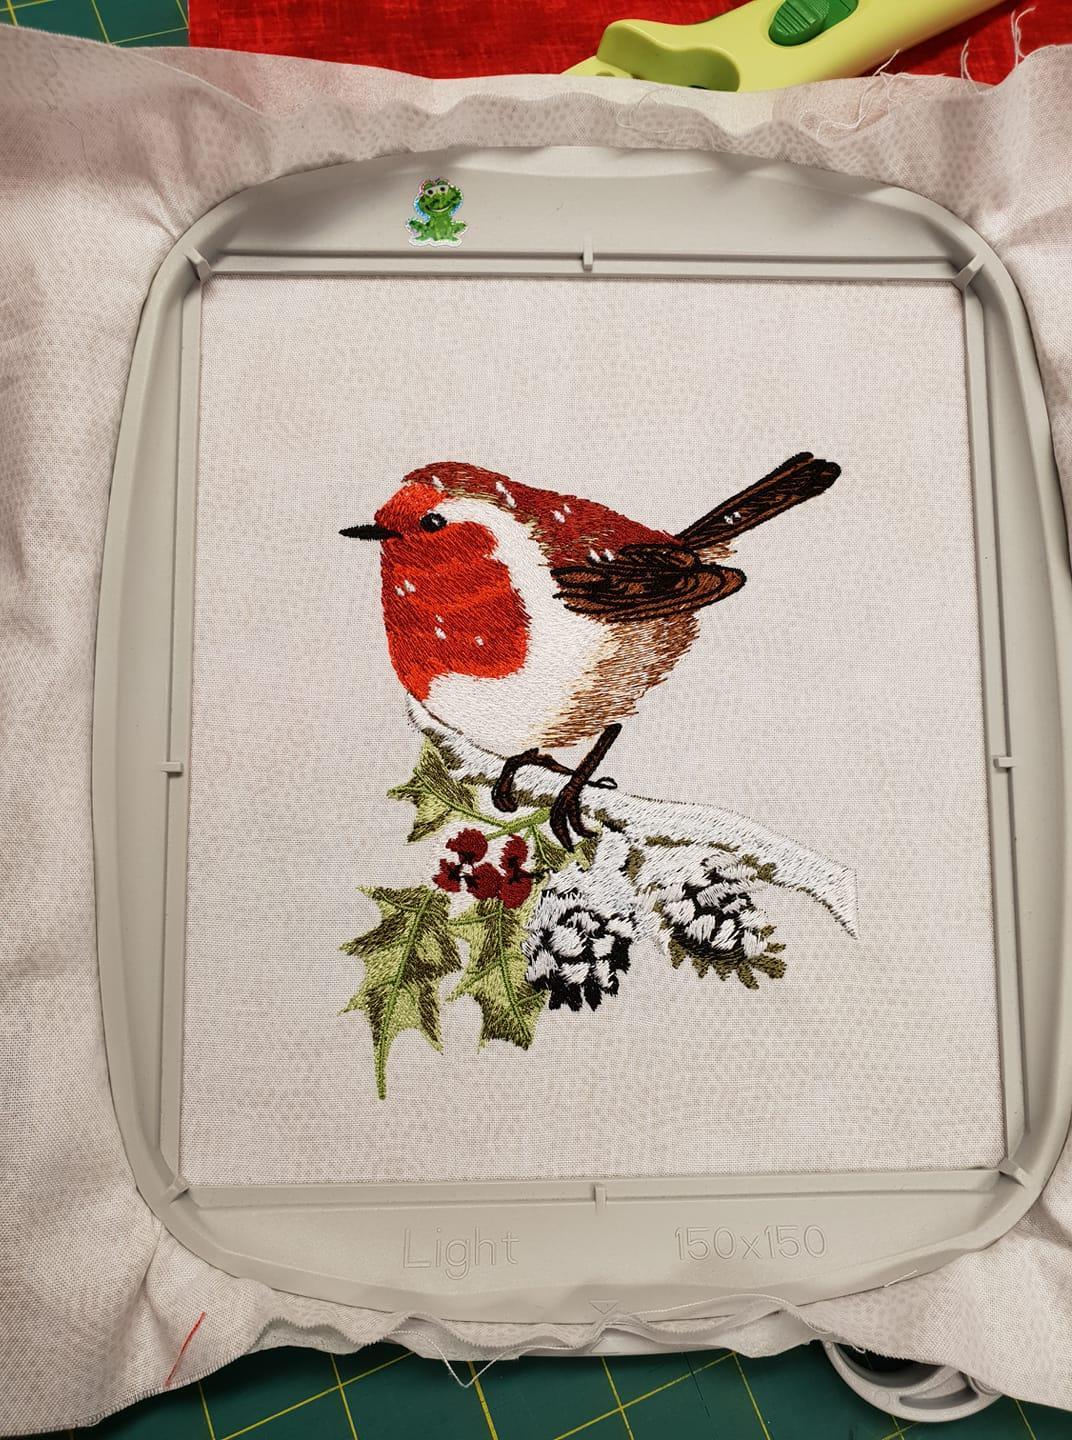 In hoop Robin on holly branch embroidery design